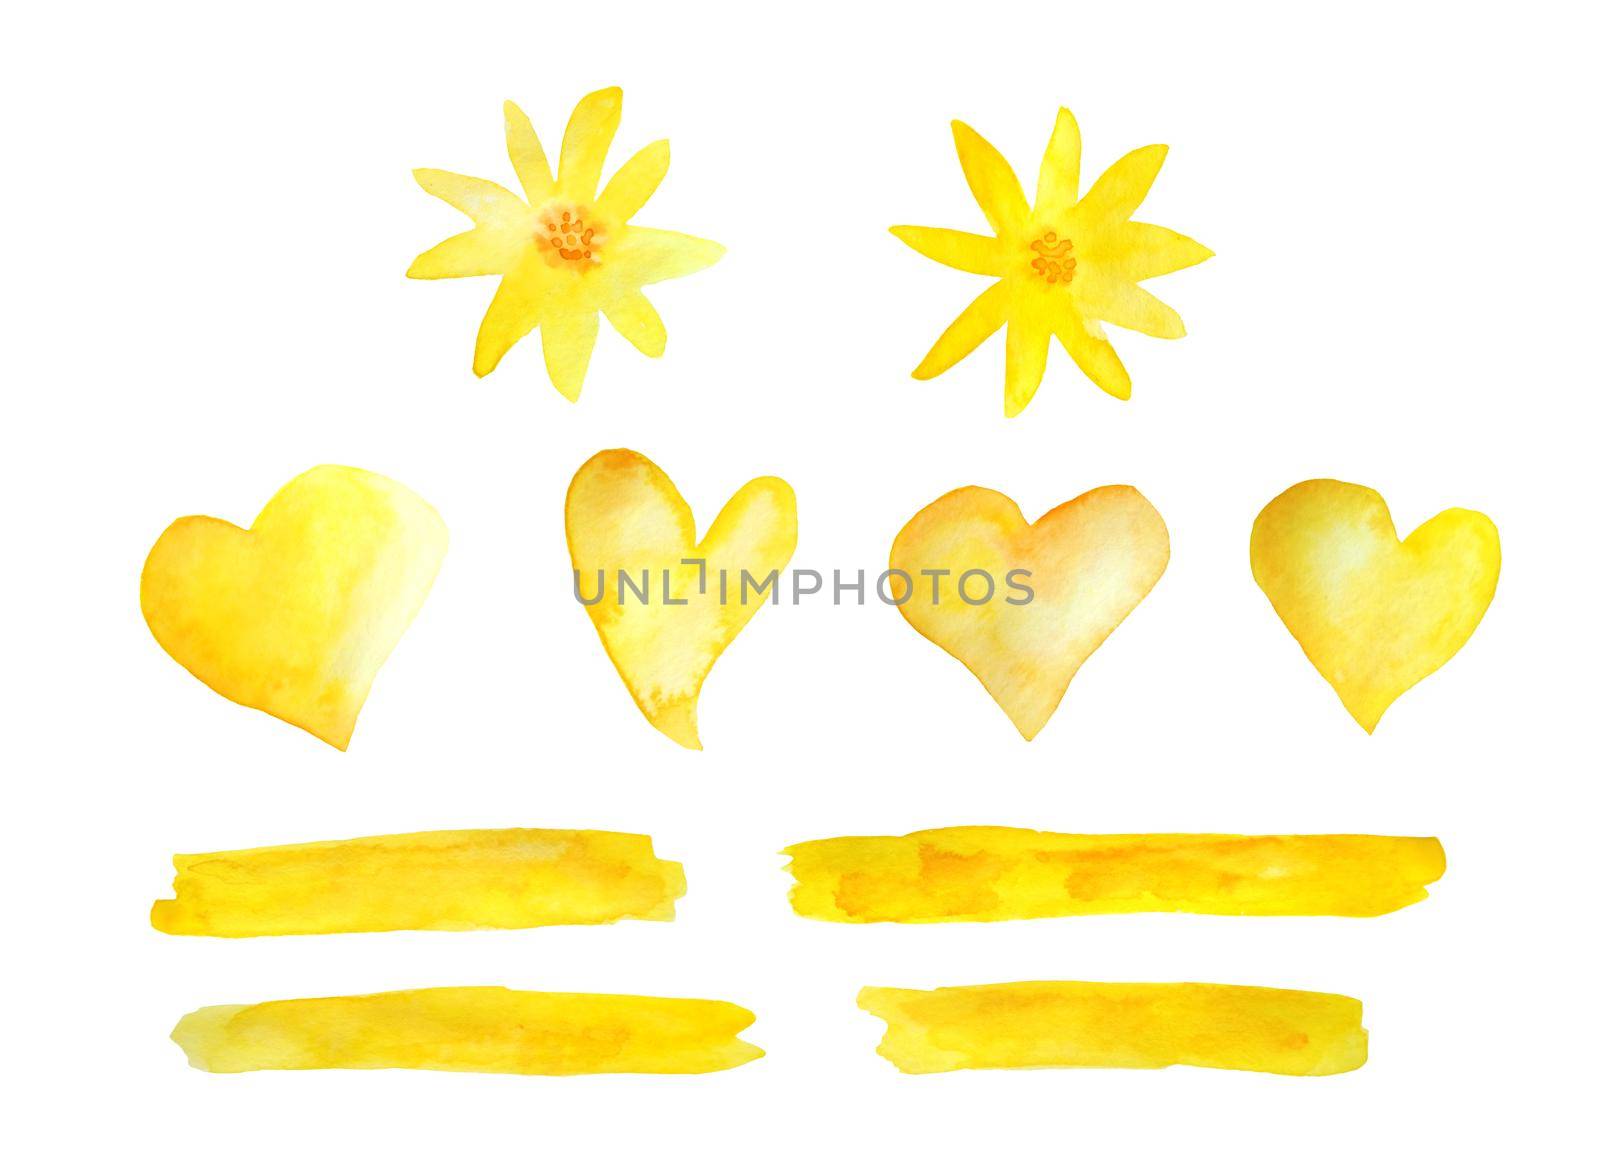 Set of watercolor hand drawn design elements, hearts stripes lines daisy flowers. Illustration in warm sunny yellow orange colors. For st valentine romantic love, blossom summer wedding decoration